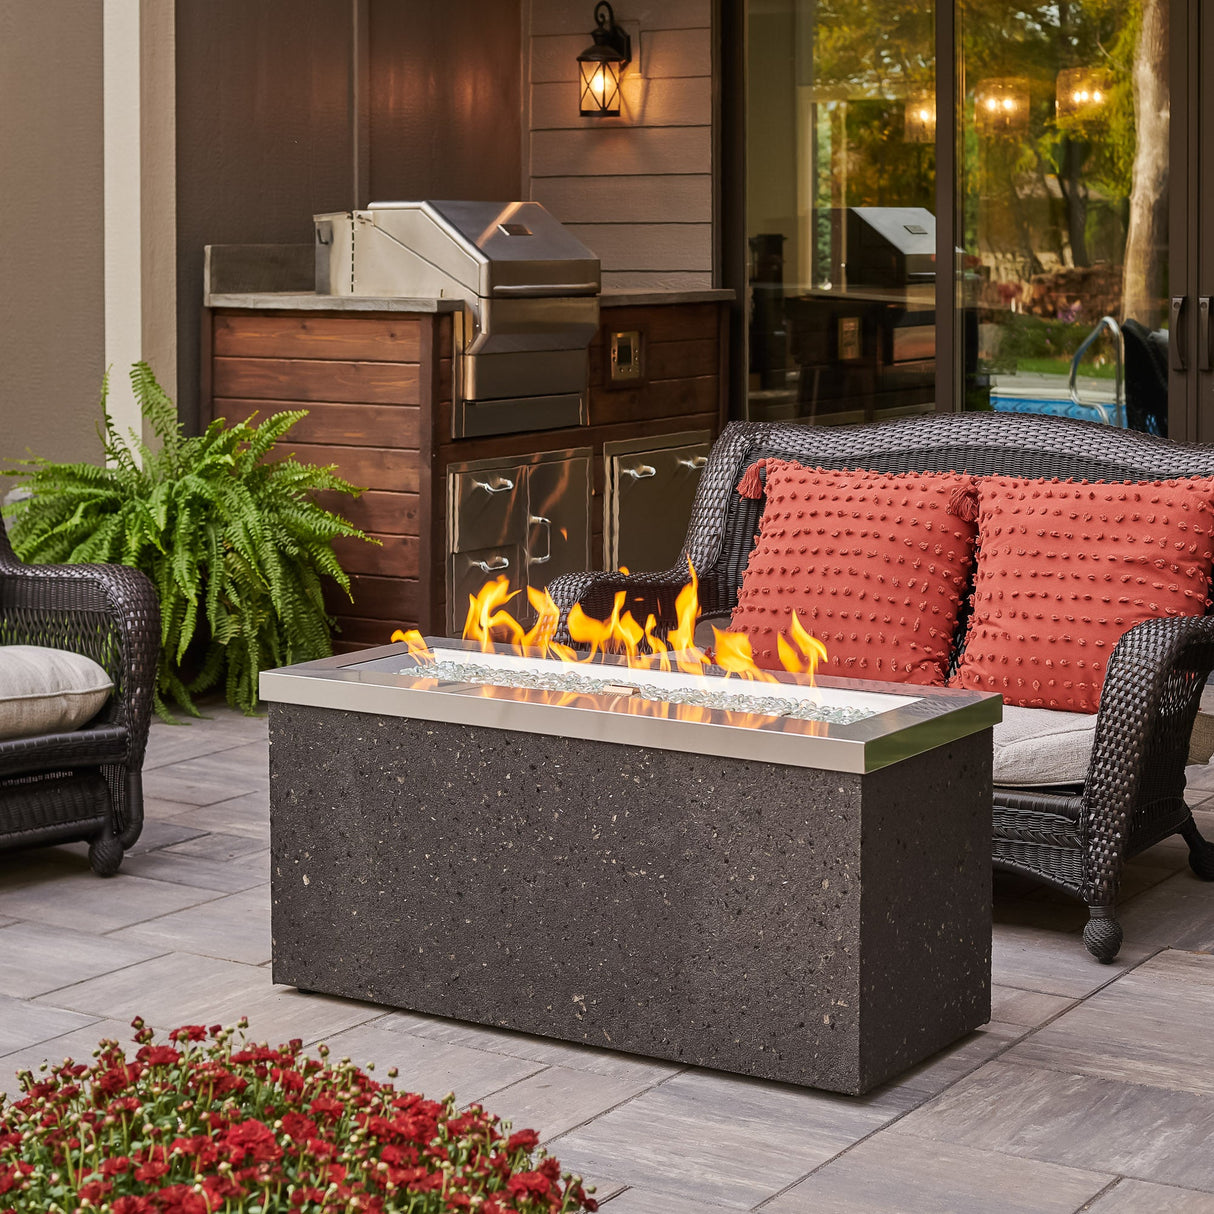 Stainless Steel Key Largo Linear Gas Fire Pit Table placed on a patio with a nice flame coming from the burner